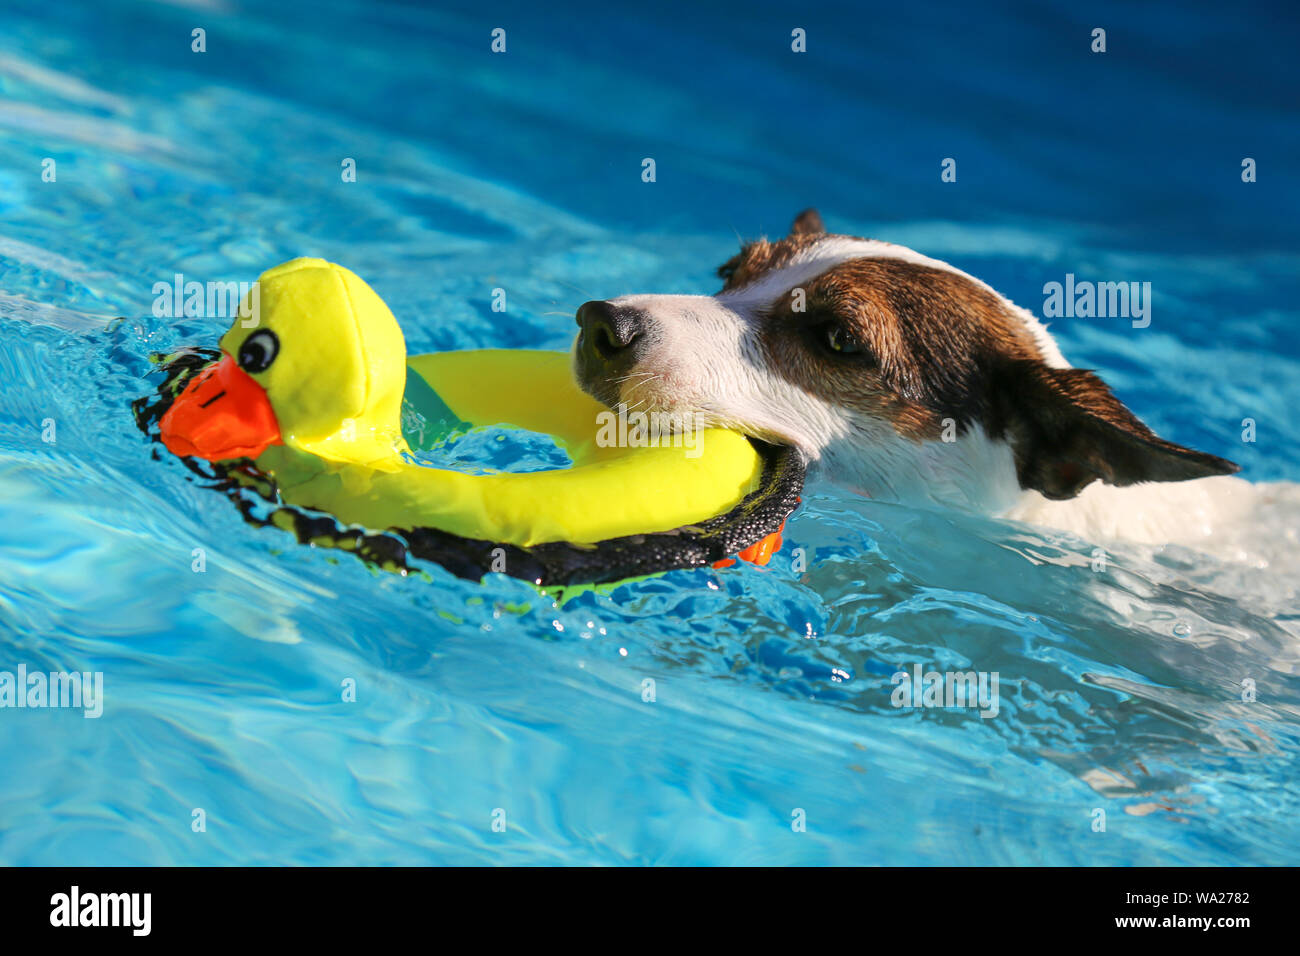 Jack Russell Terrier dog swimming outdoors with yellow toy duck in mouth Stock Photo